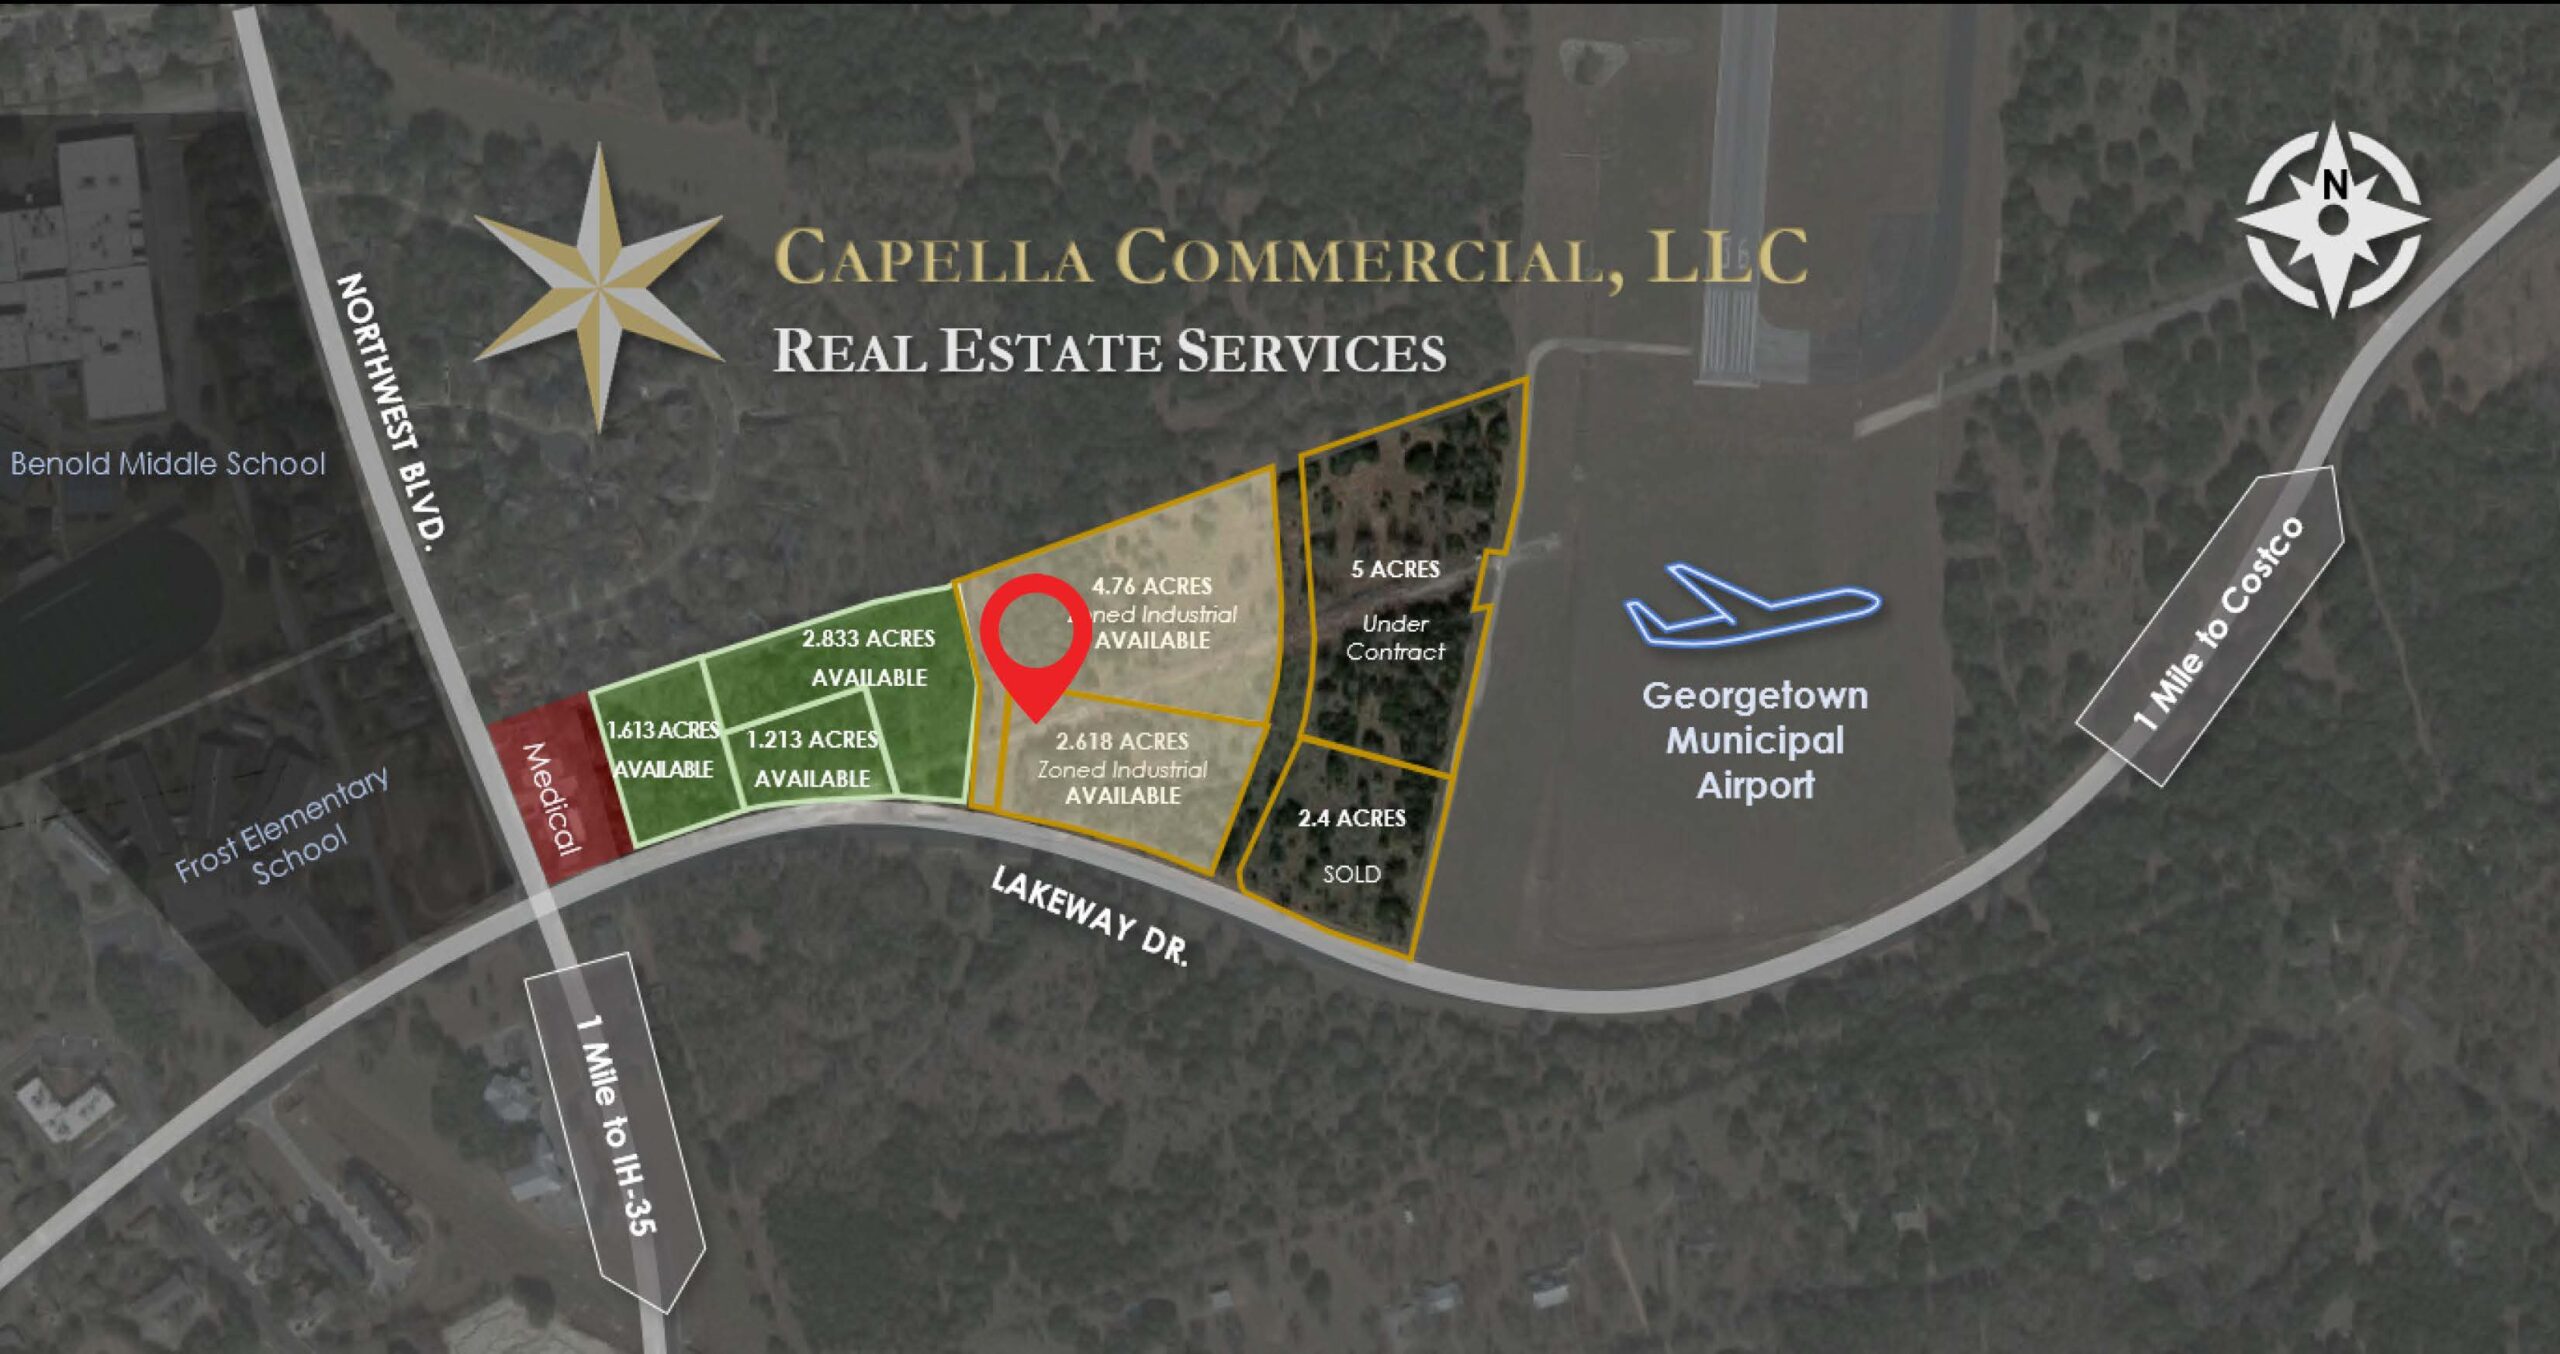 2.6 Ac. Industrial Opportunity in Georgetown